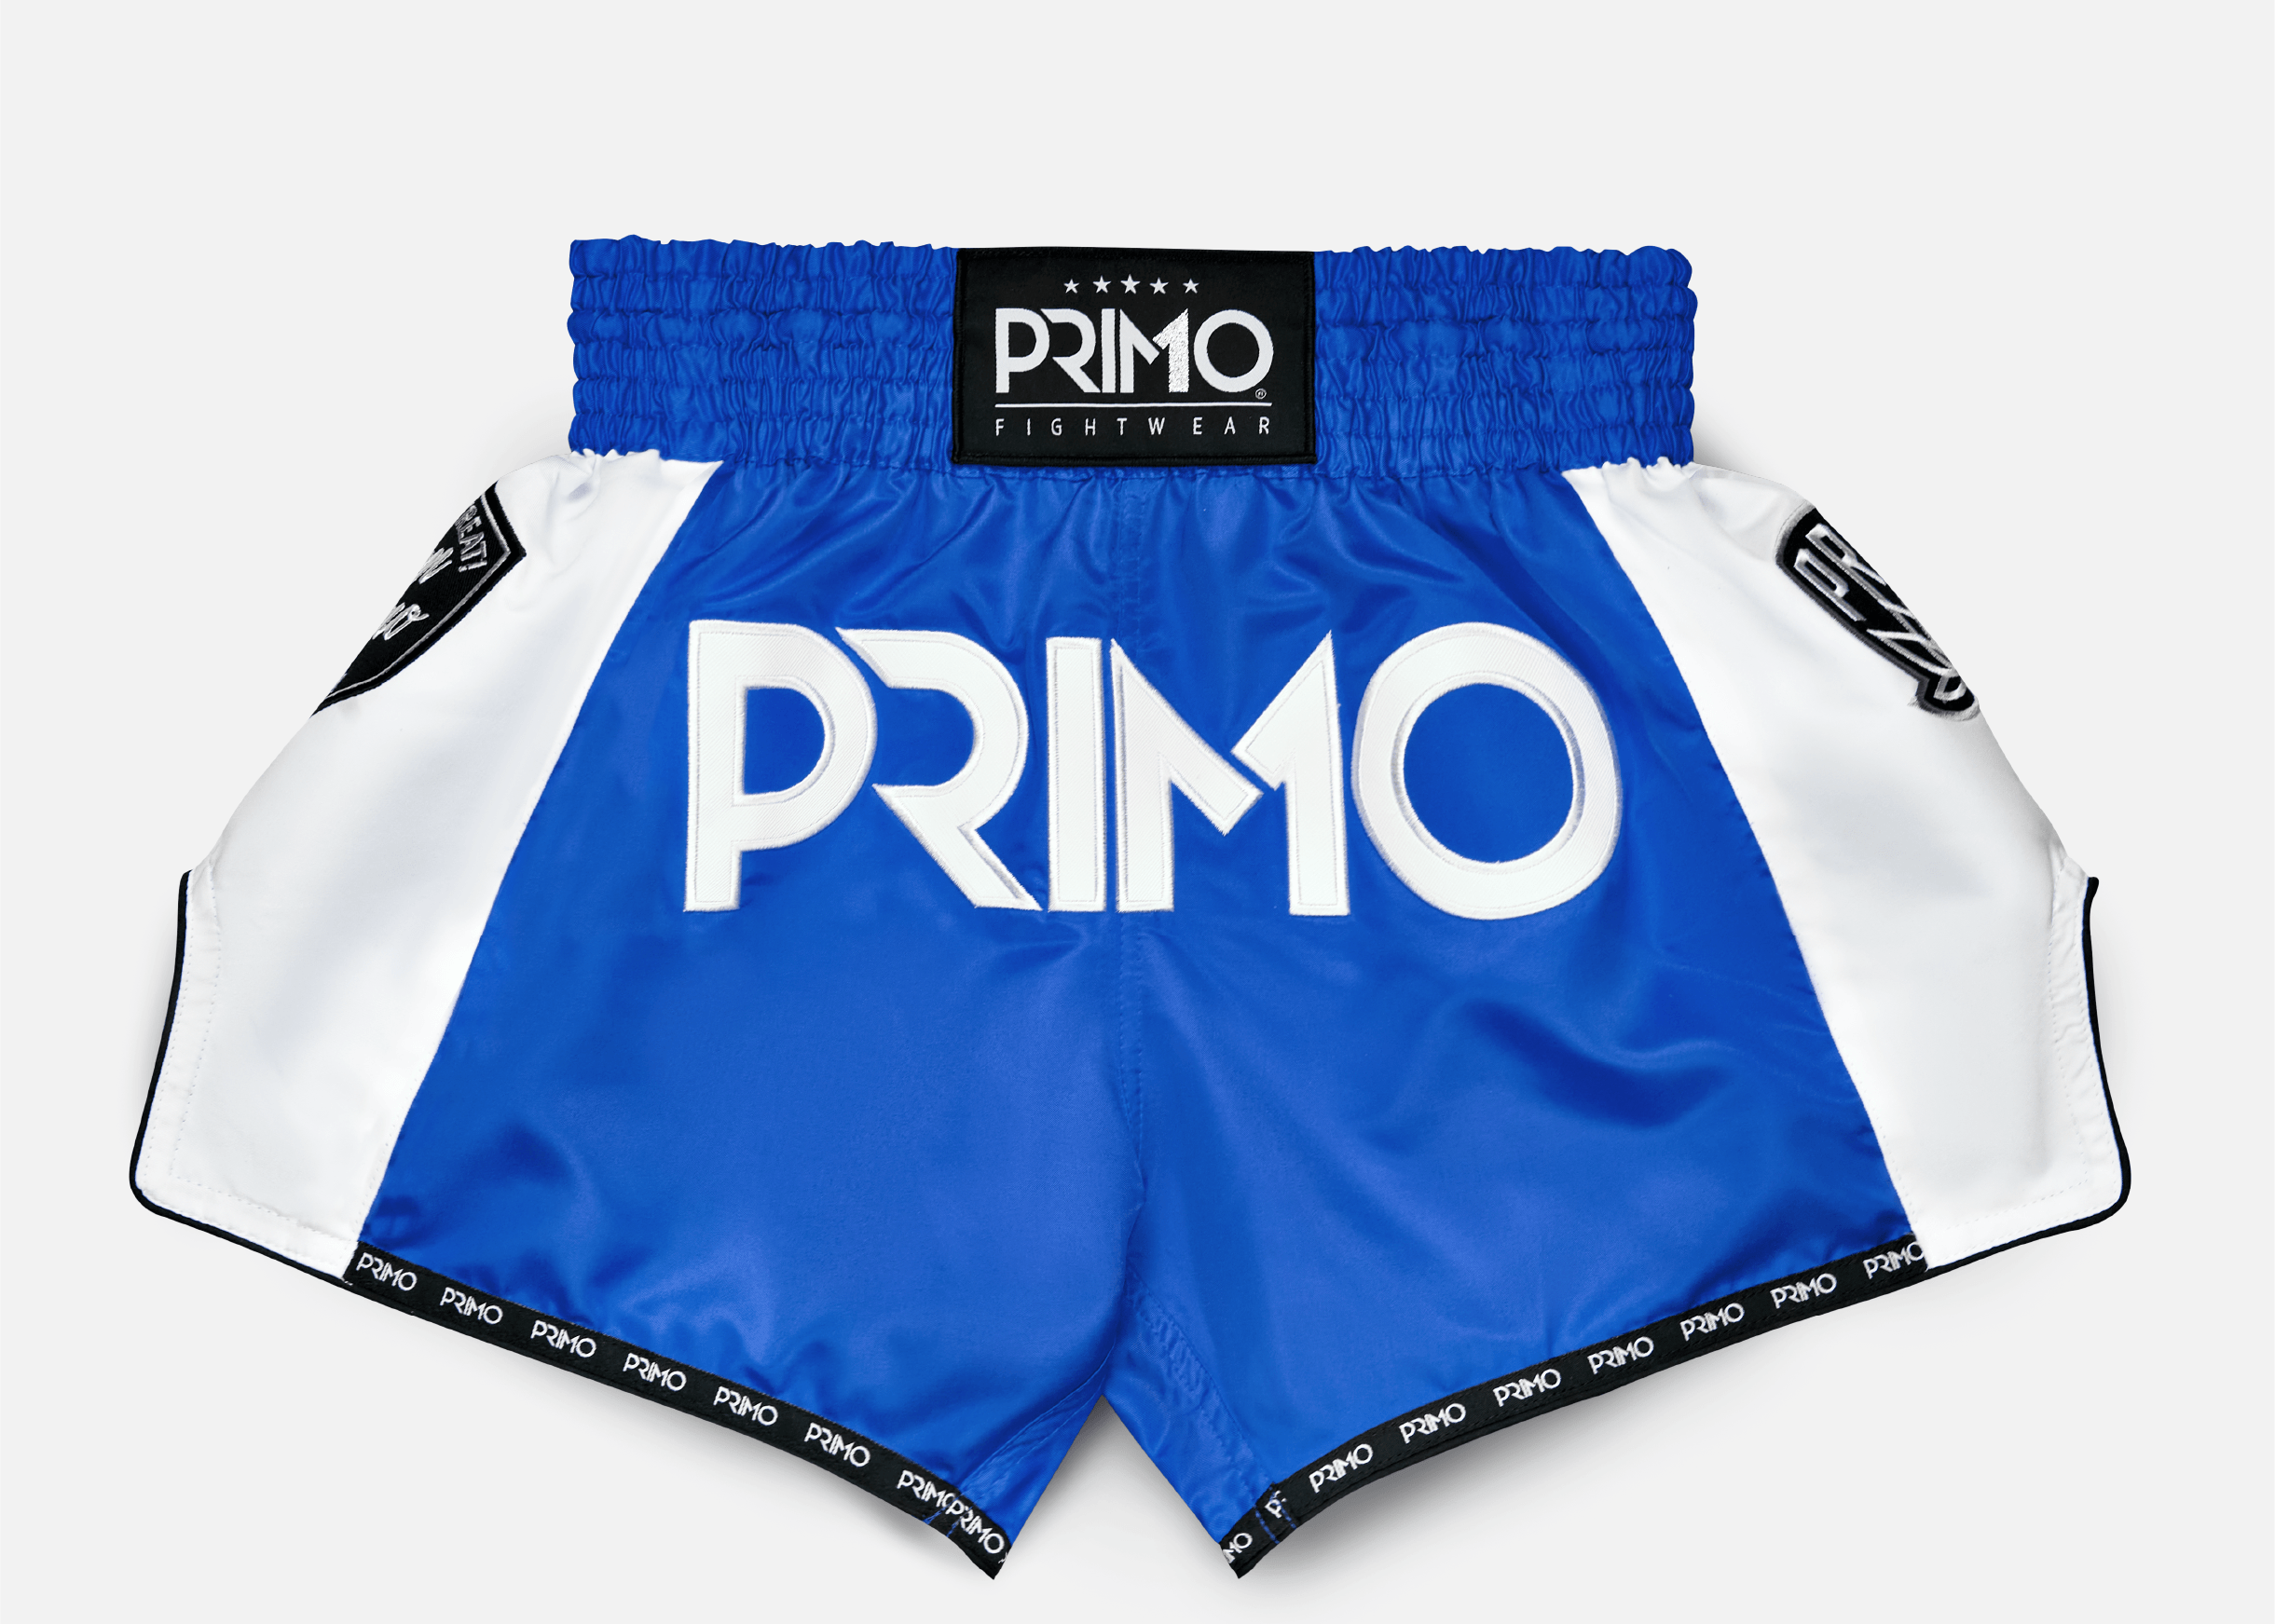 Primo Fight Wear Official Muay Thai Shorts - Free Flow Series - Stadium Classic Blue